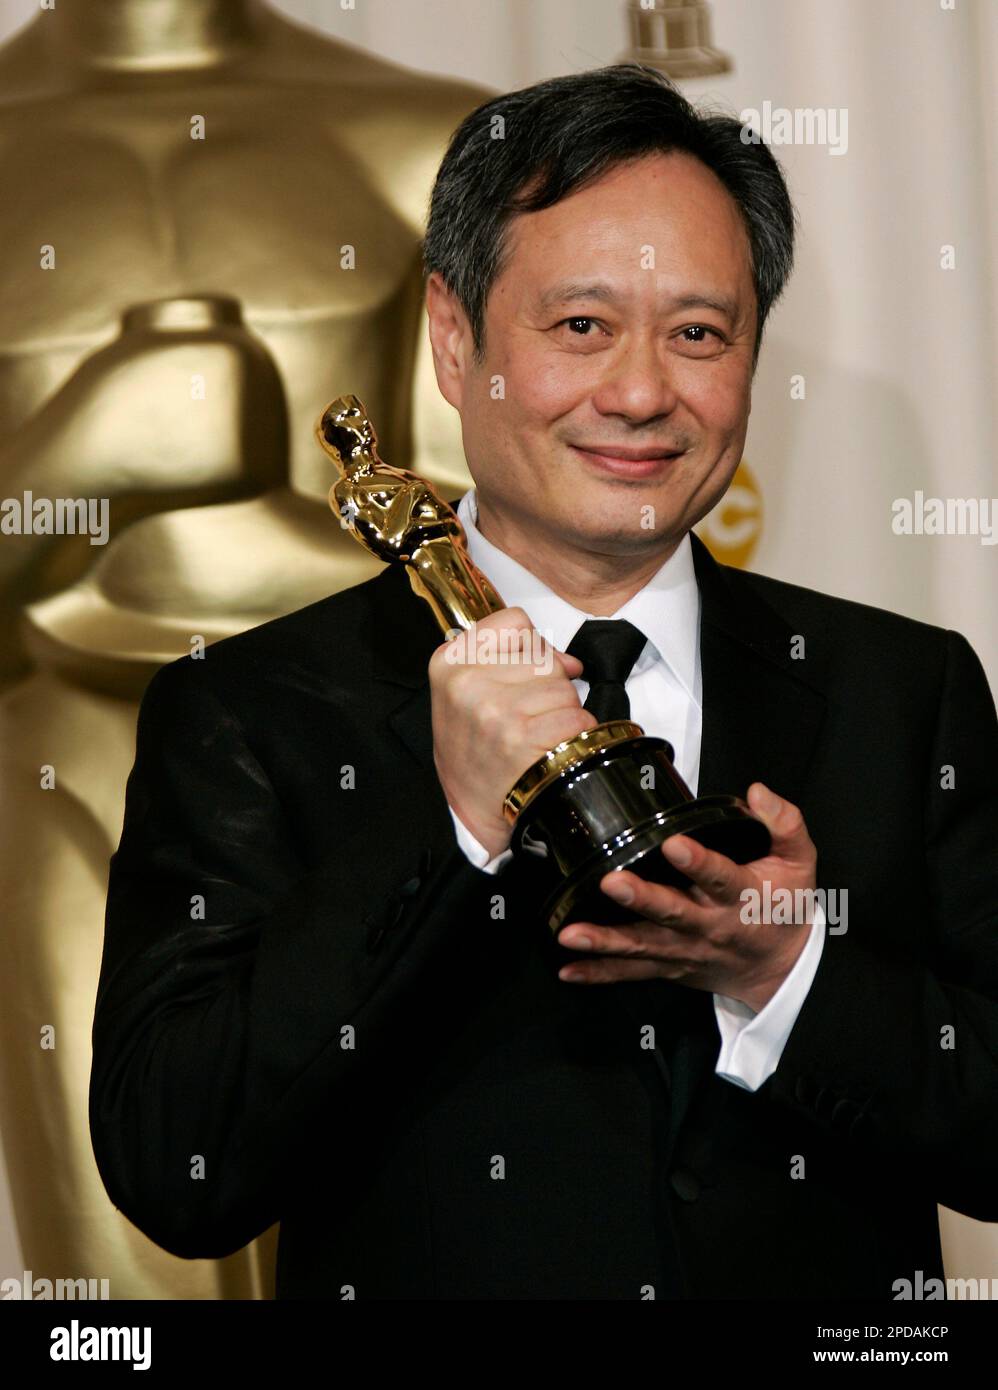 Director Ang Lee poses with the Oscar he won for best director for his work on "Brokeback Mountain" at the 78th Academy Awards Sunday, March 5, 2006, in Los Angeles. (AP Photo/Kevork Djansezian) Stockfoto